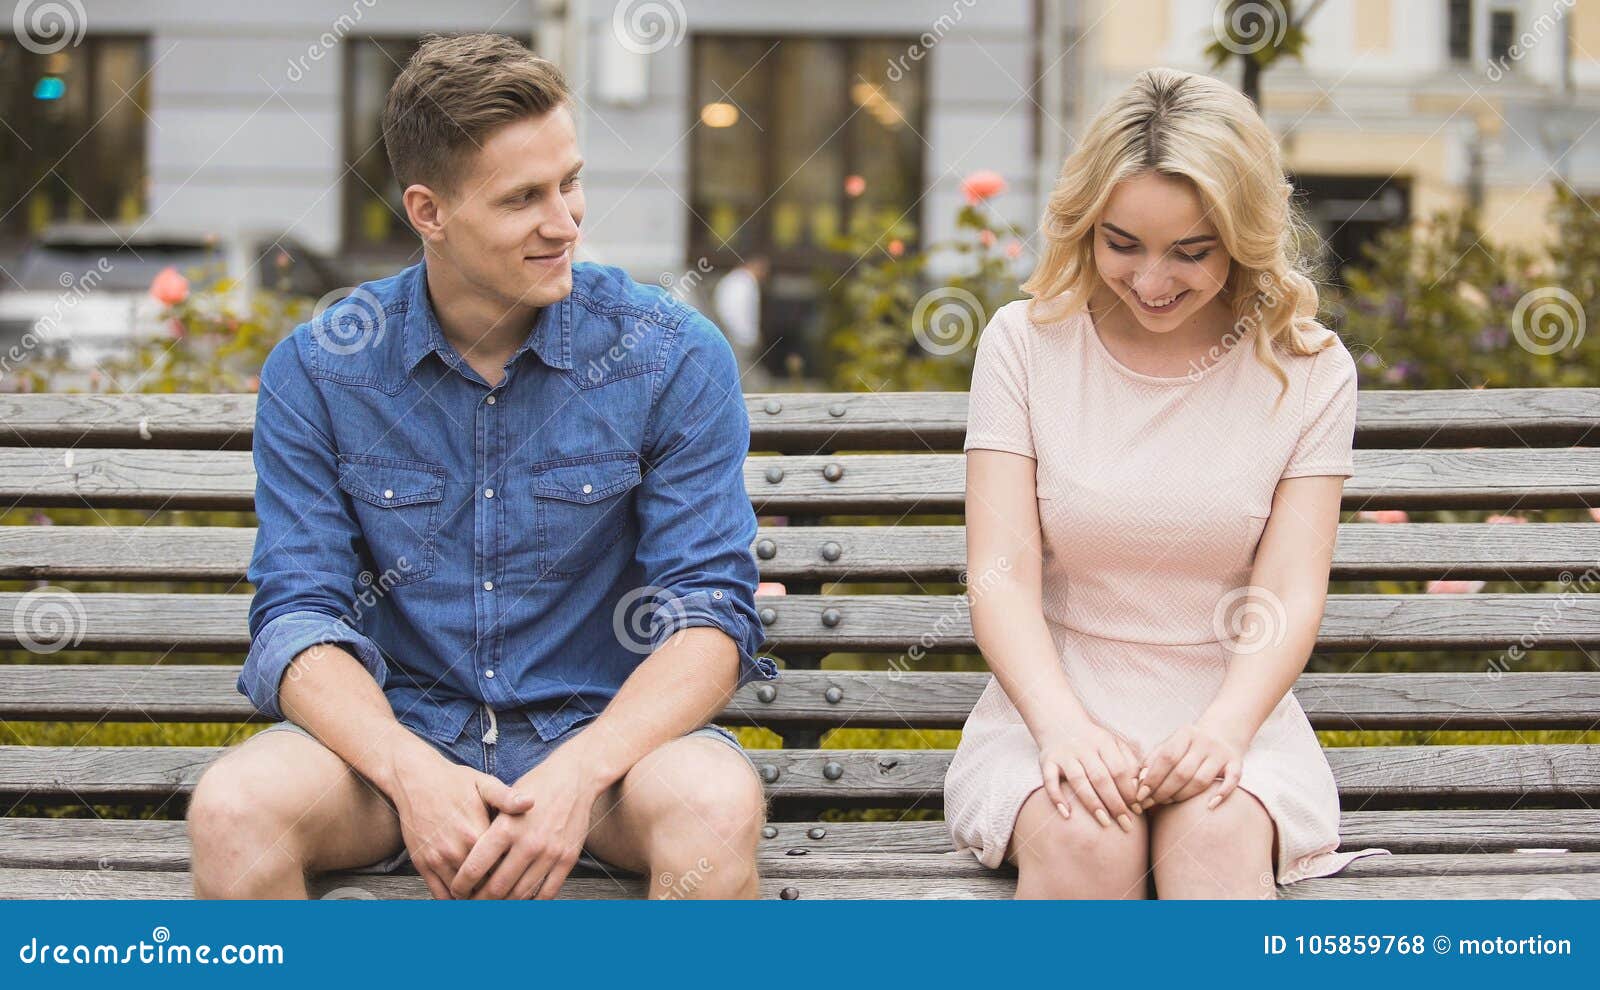 shy blonde girl smiling, attractive guy flirting with beautiful woman on bench